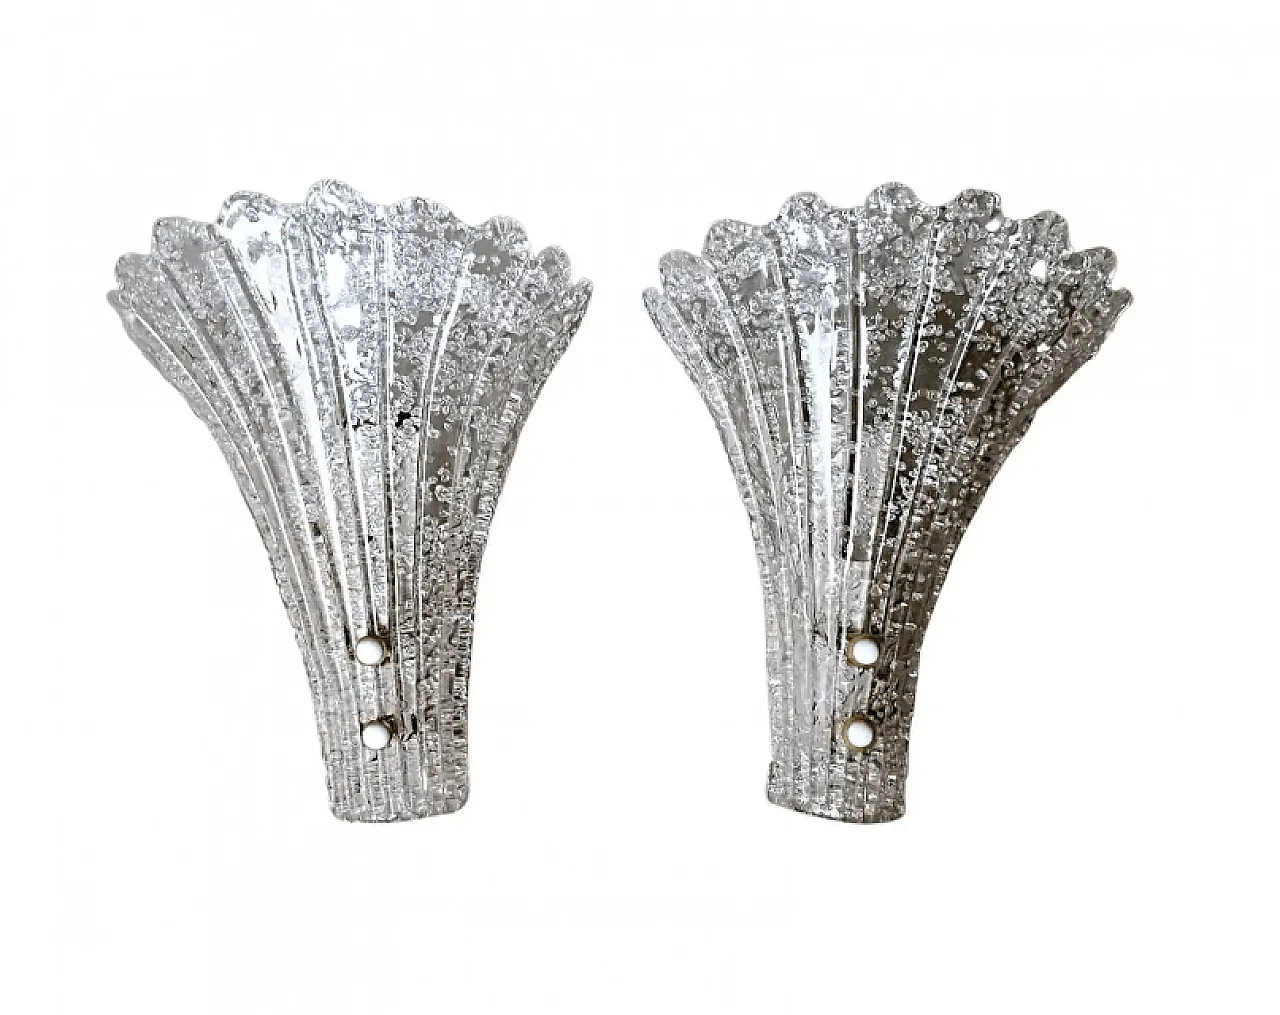 Pair of Murano glass wall sconces attributed to Venini, 1950s 1